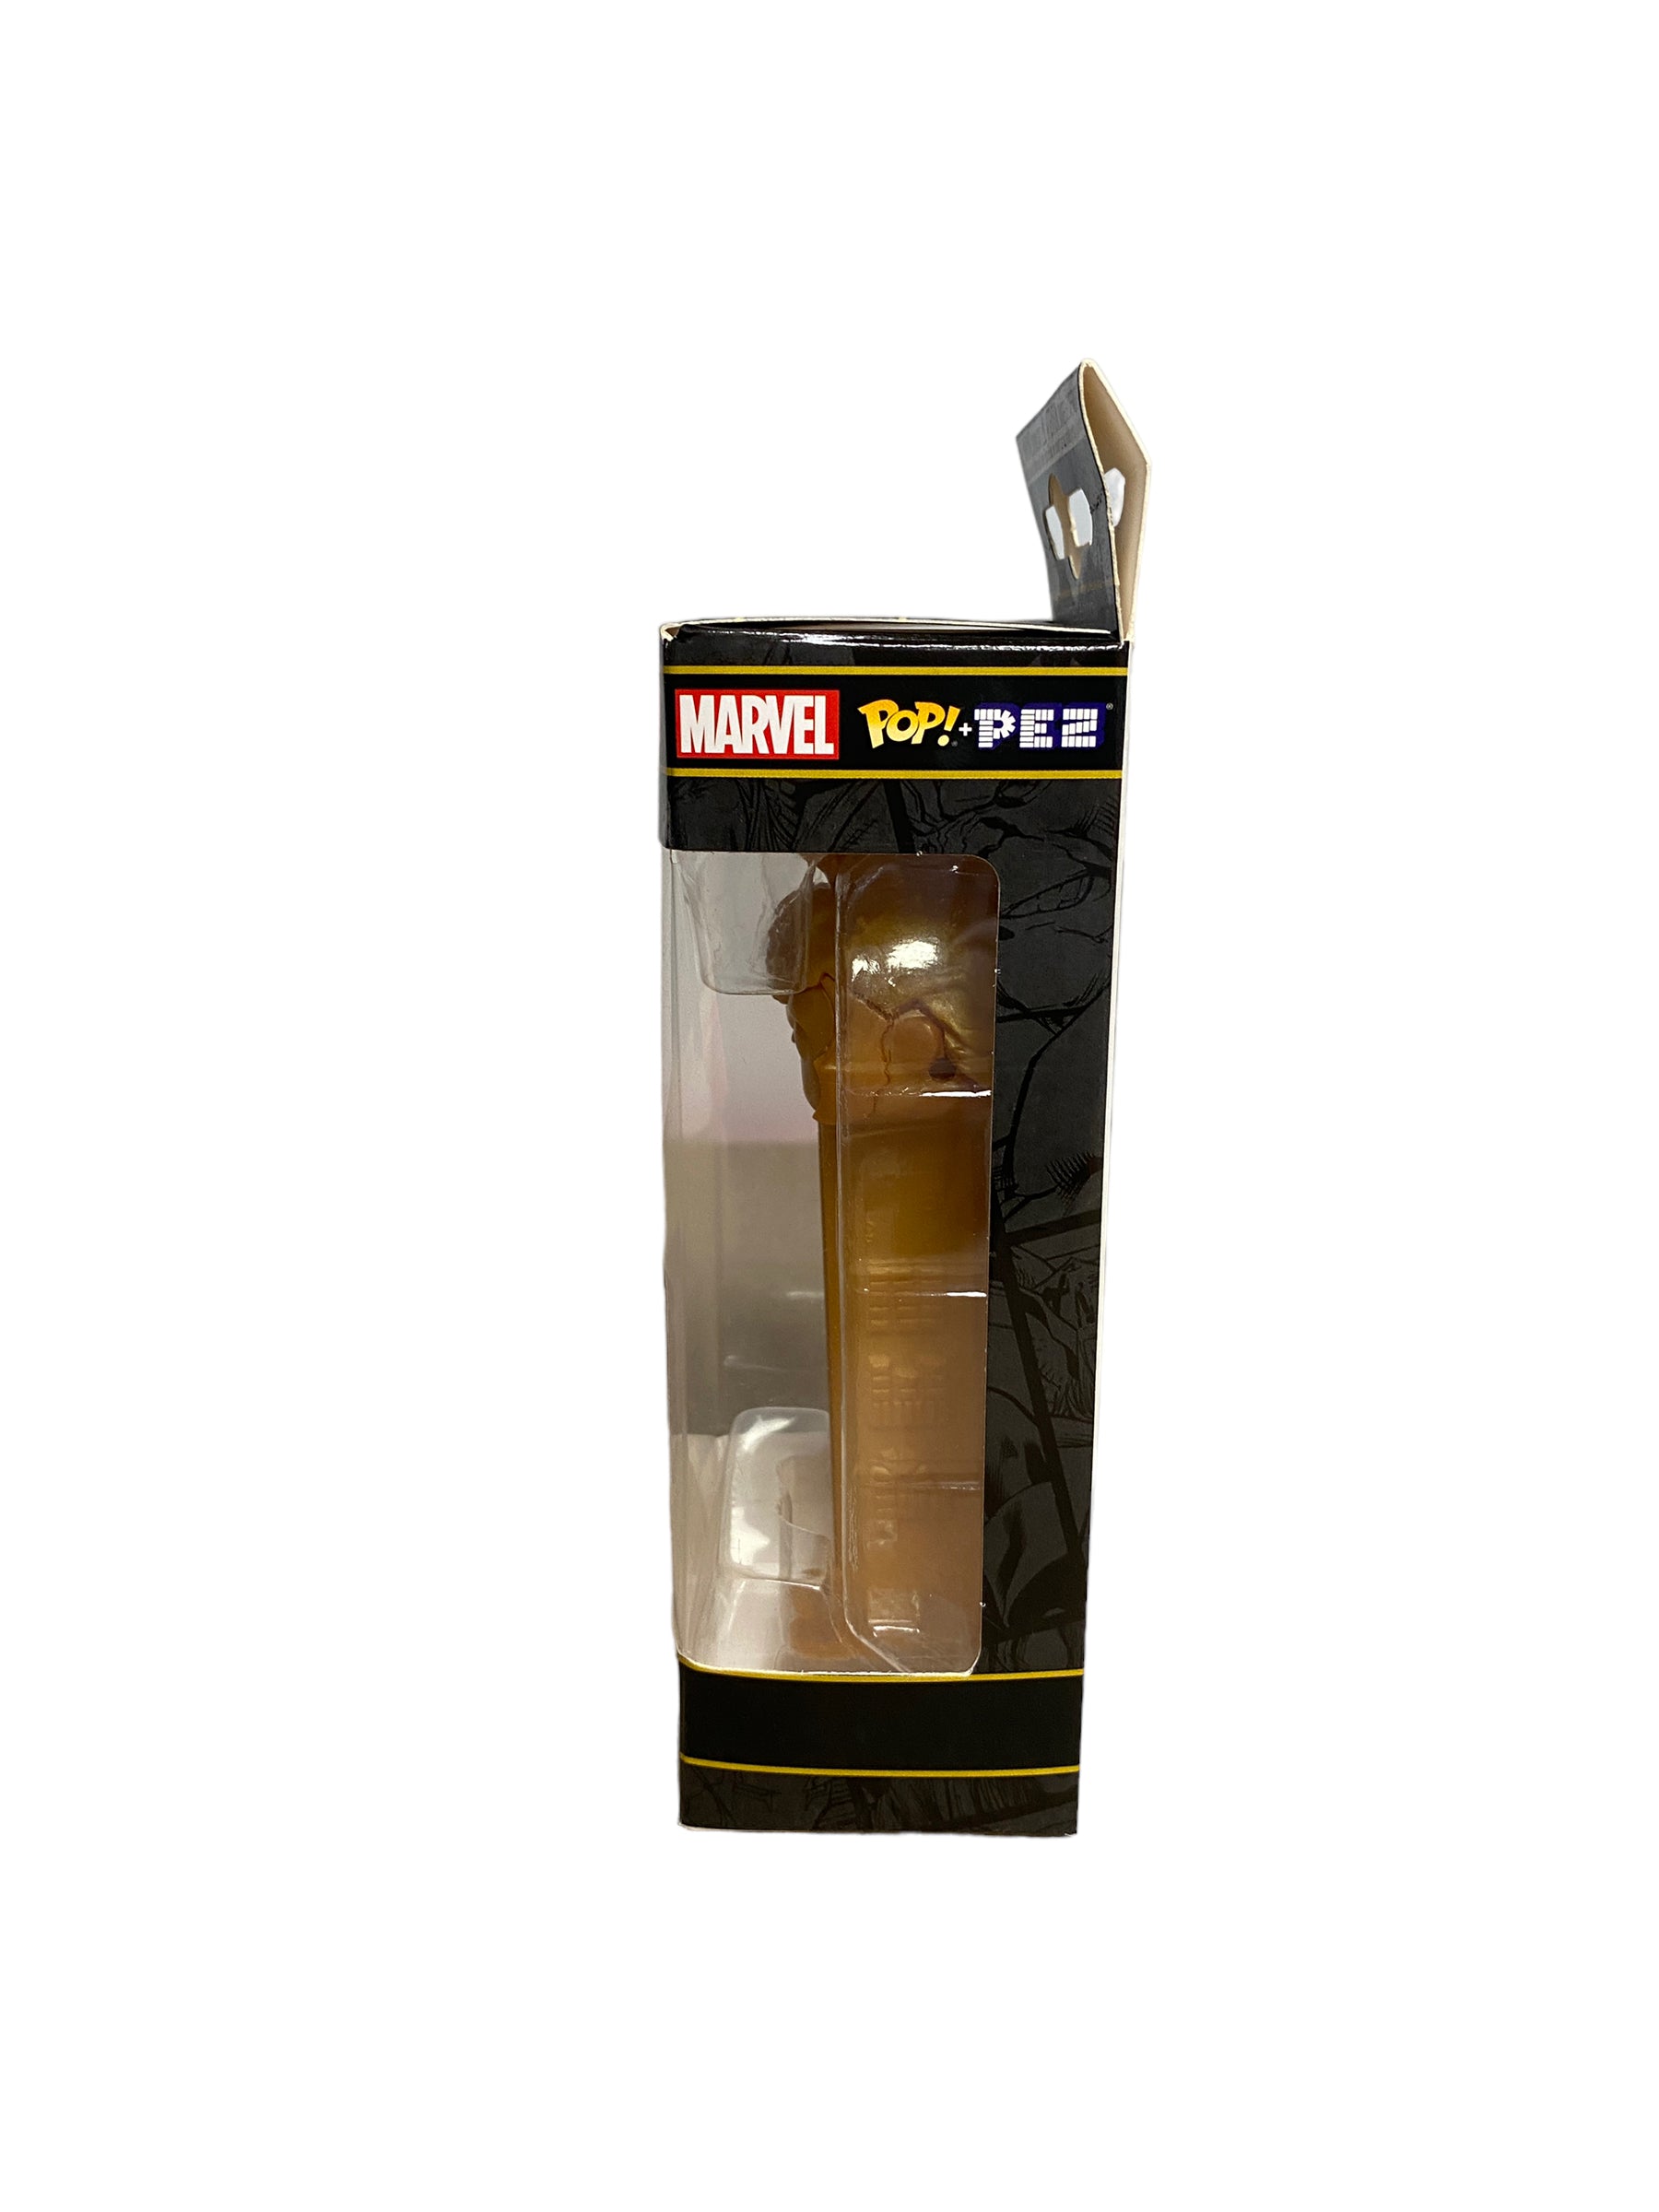 Hulk (Gold) Funko Pop Pez! - Marvel - Marvel Collector Corps Exclusive - Condition 8.75/10